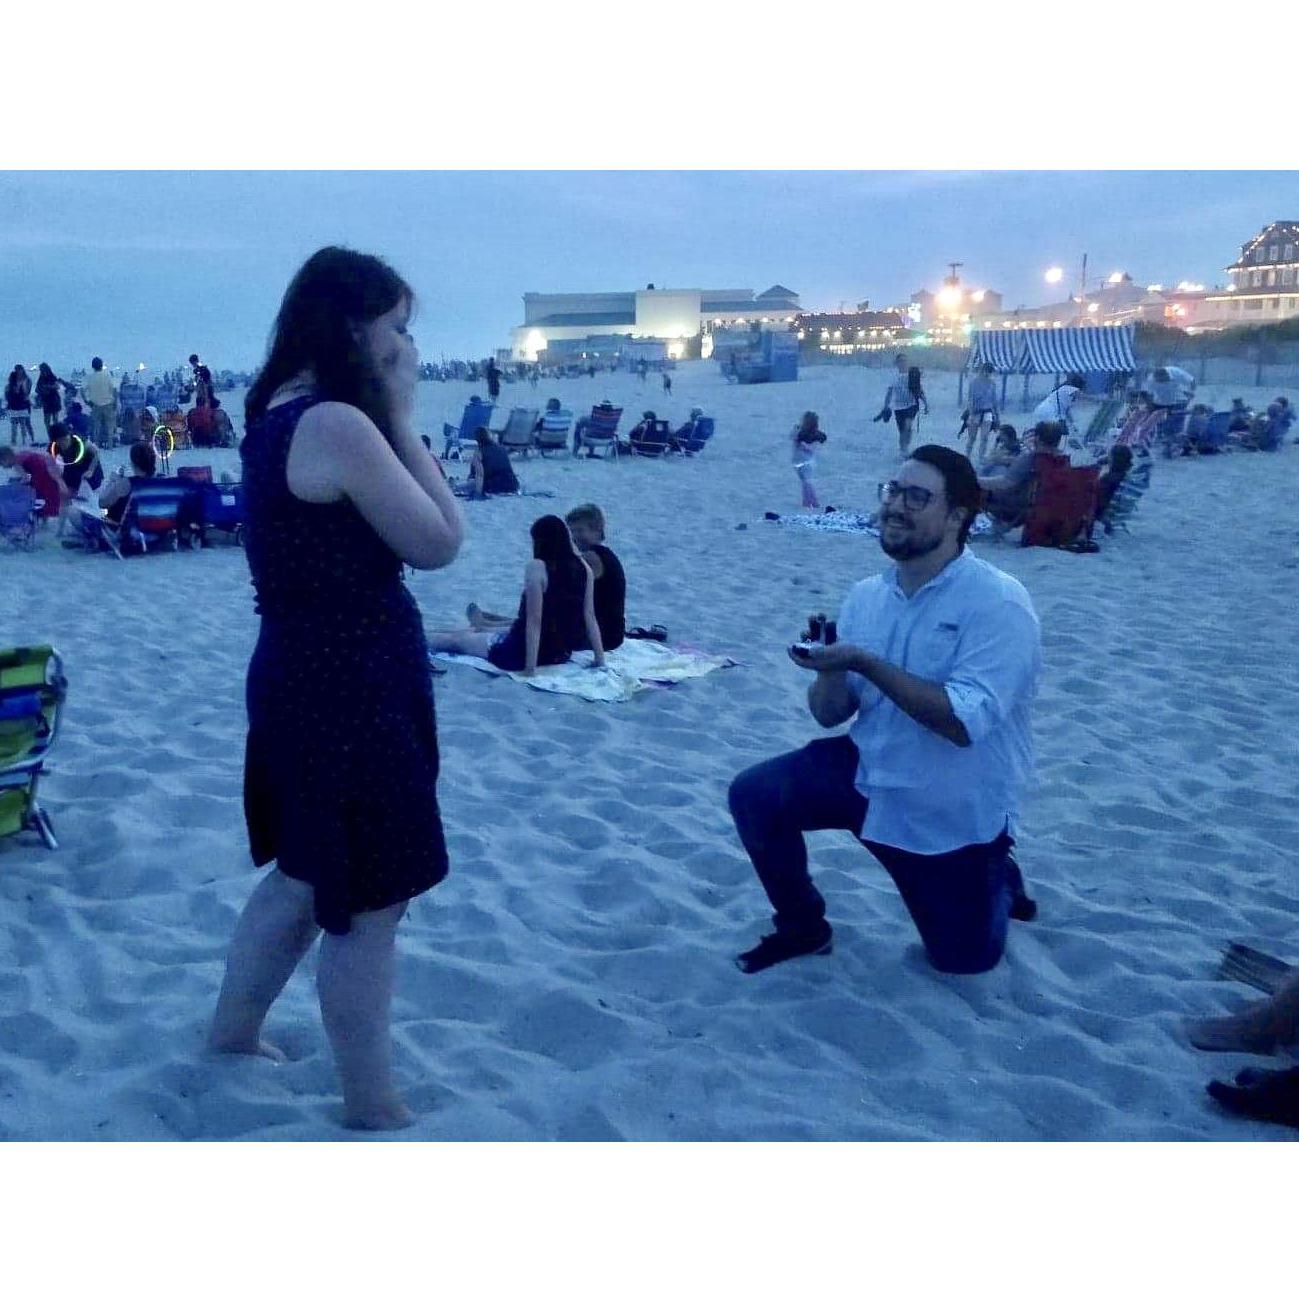 Engagement, July 4th 2019.